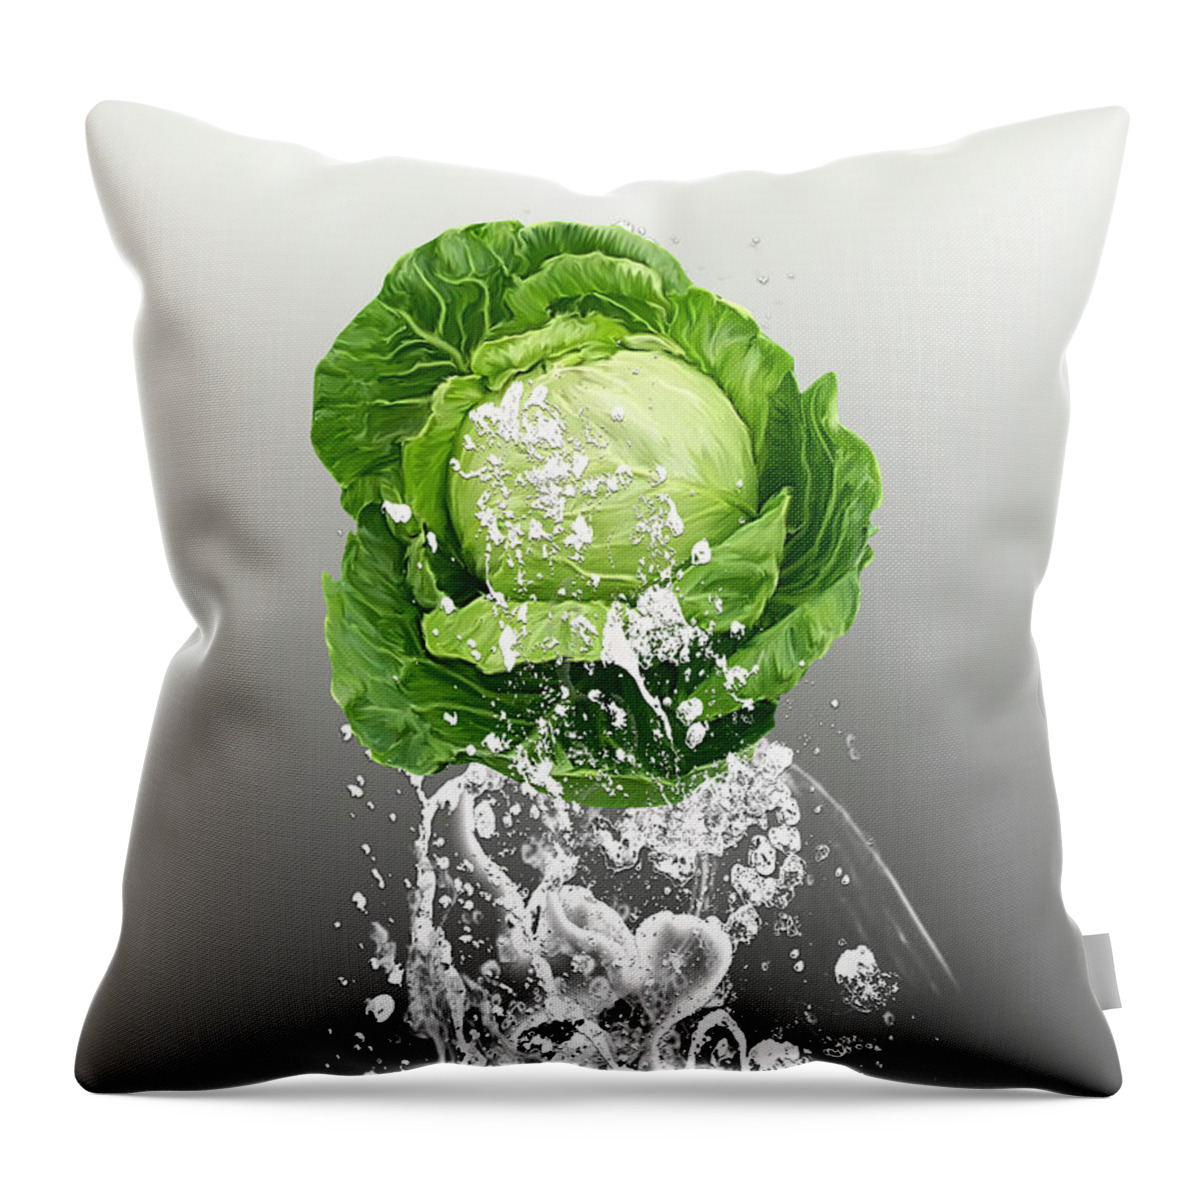 Cabbage Art Mixed Media Throw Pillow featuring the mixed media Cabbage Splash #4 by Marvin Blaine